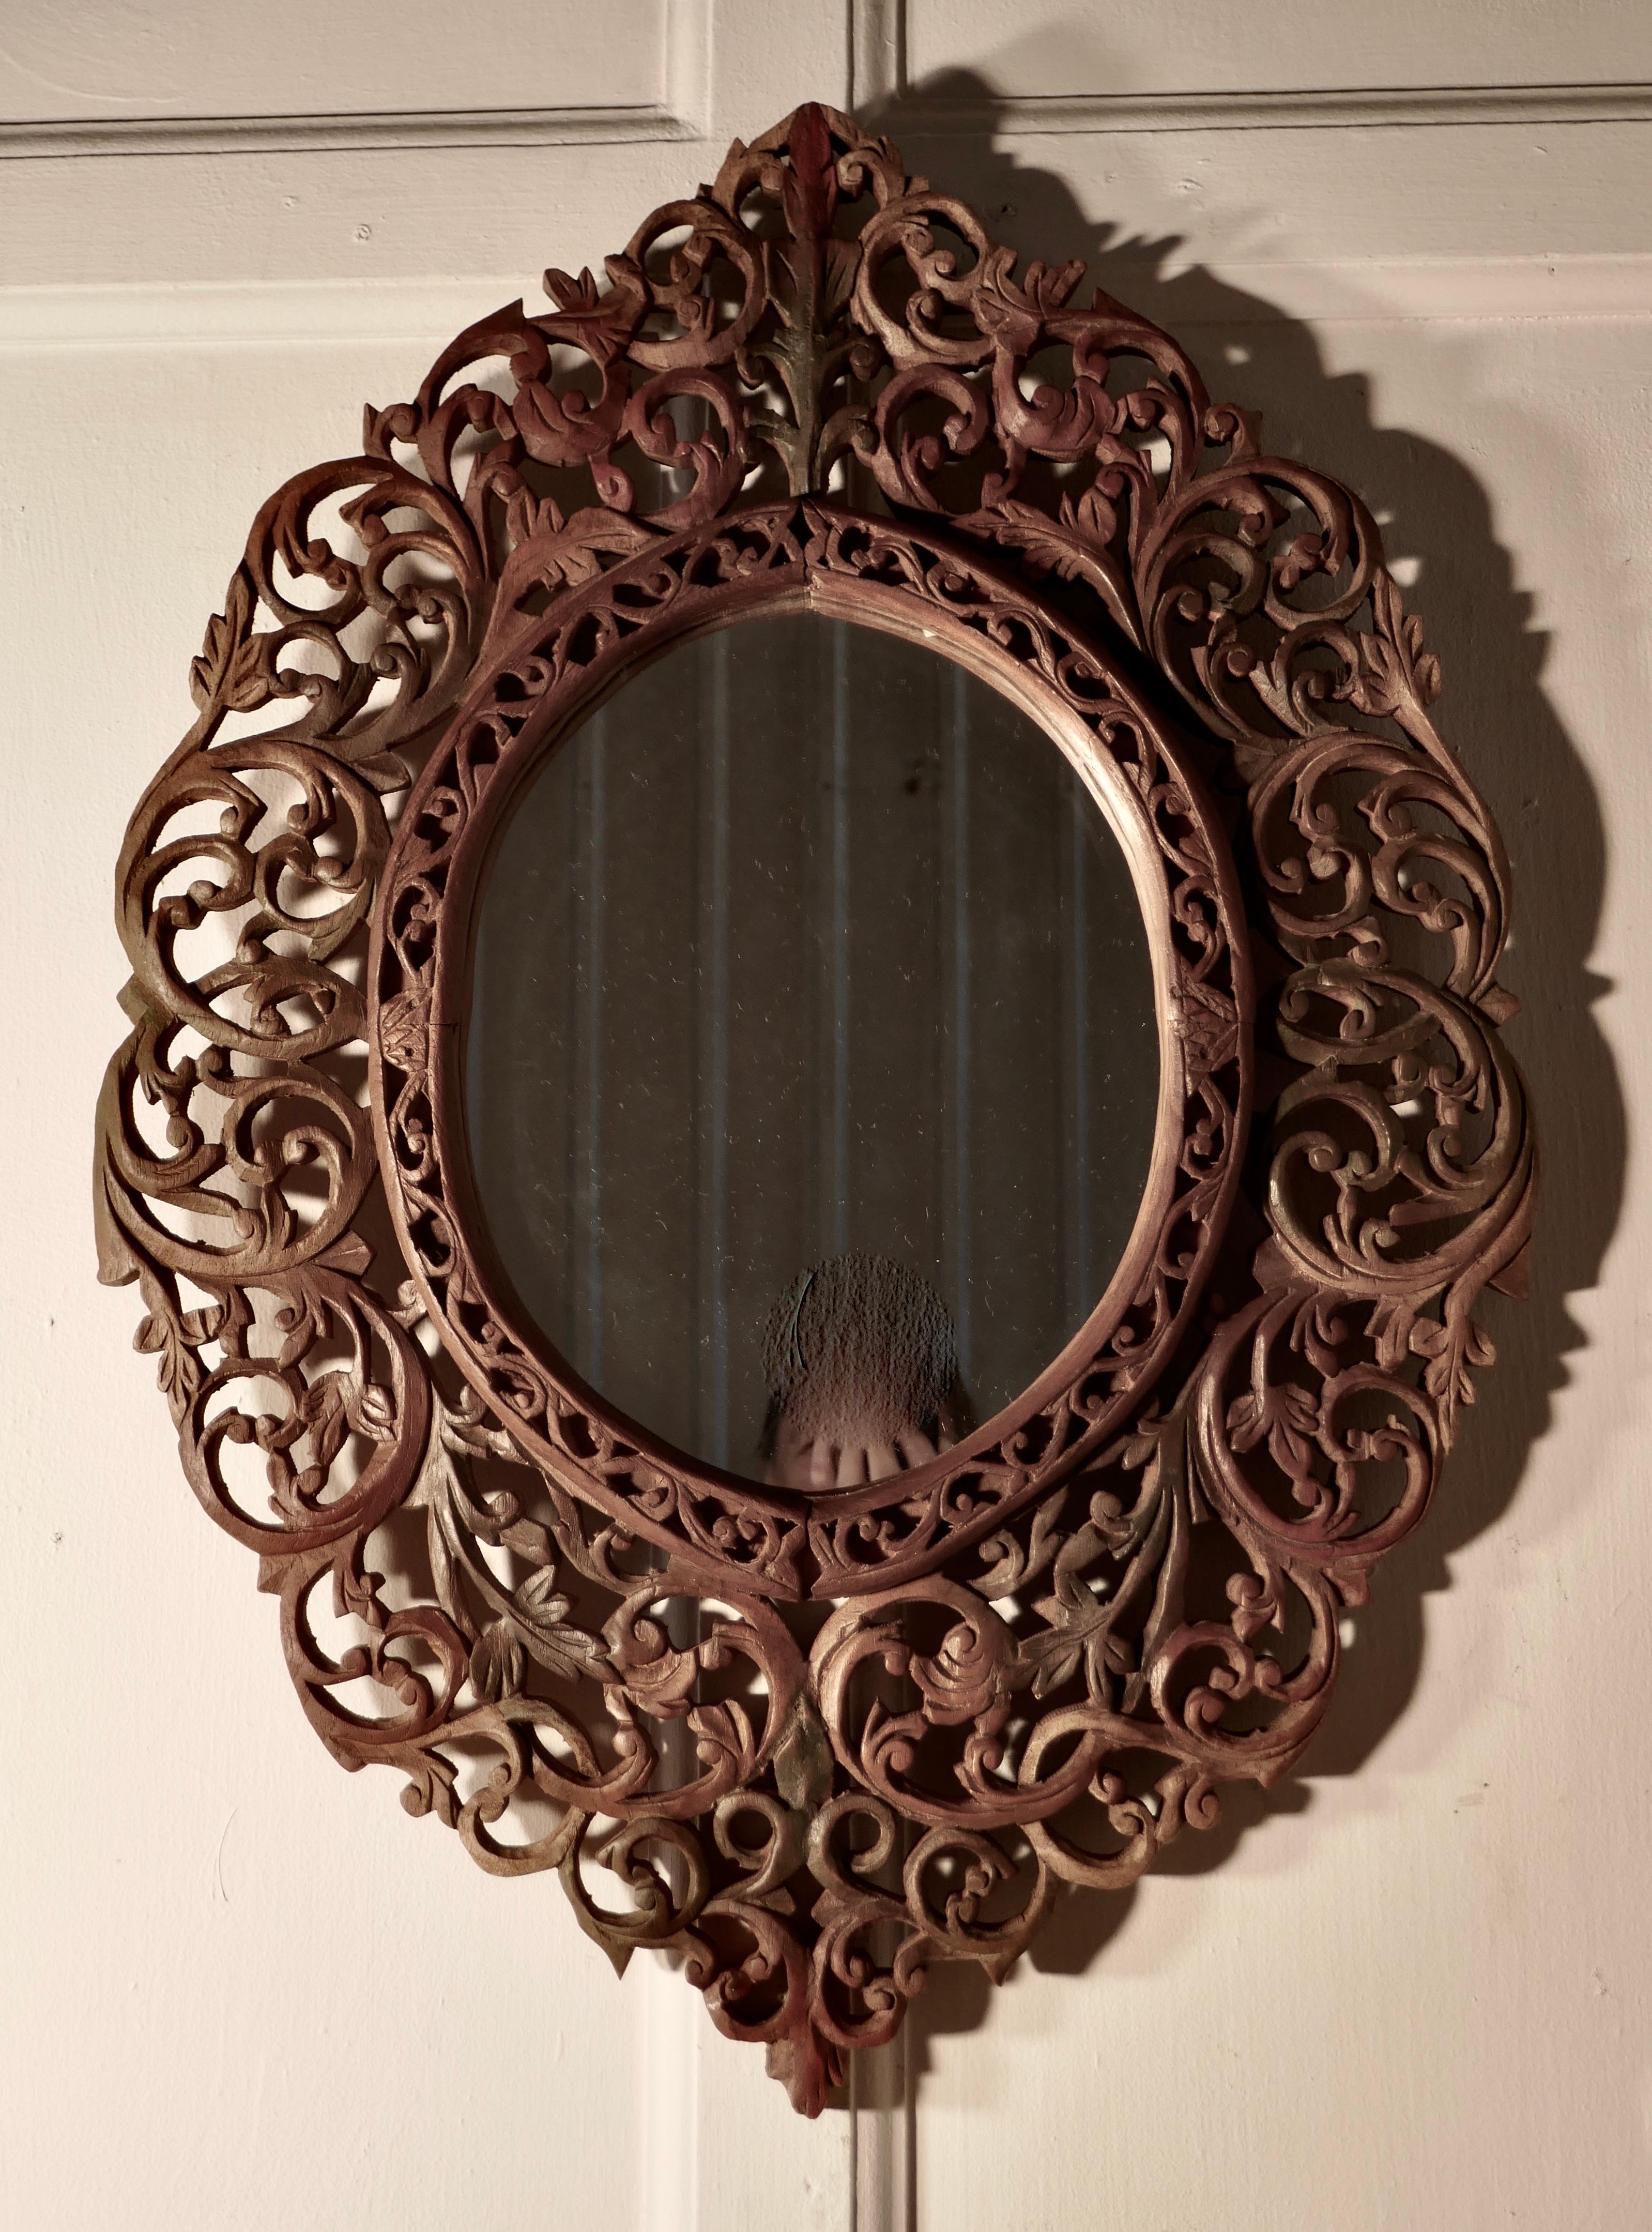 Intricately carved Islamic oval mirror

A lovely piece from the east intricately carved in Islamic style, the otherwise bare wood is delicately tinted in muted colors
The Mirror is 26” high and 18” wide
TPG35.
         